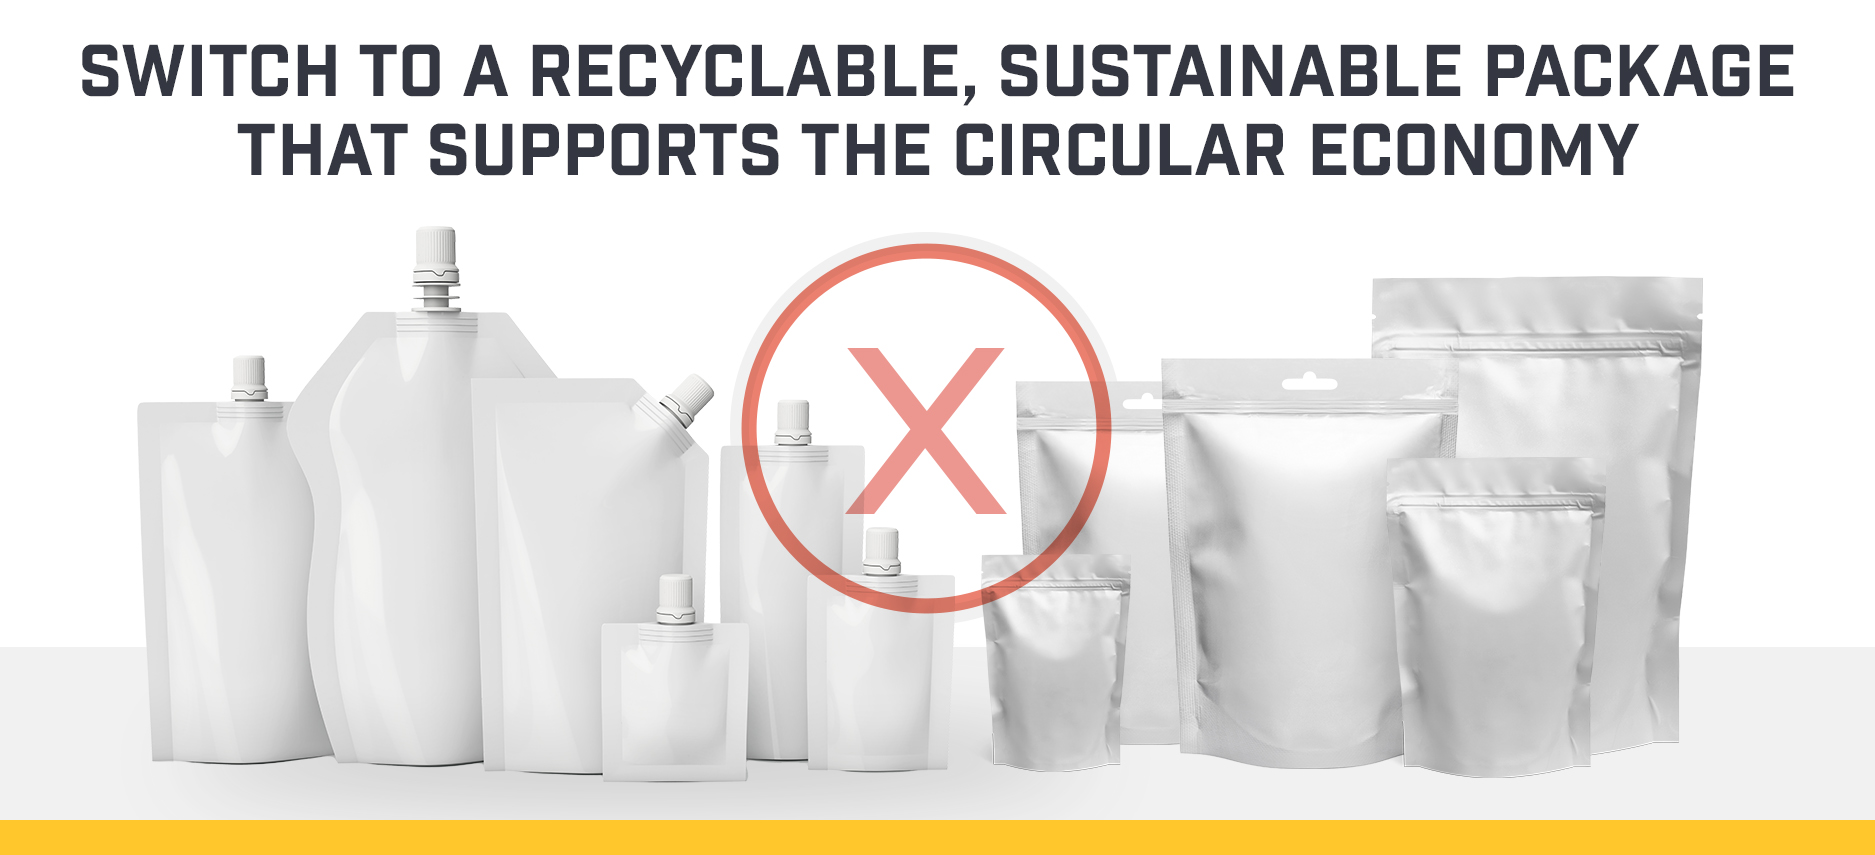 recycled content in packaging, recyclable PET package, multi-material packaging, 100% recyclability, circular economy law